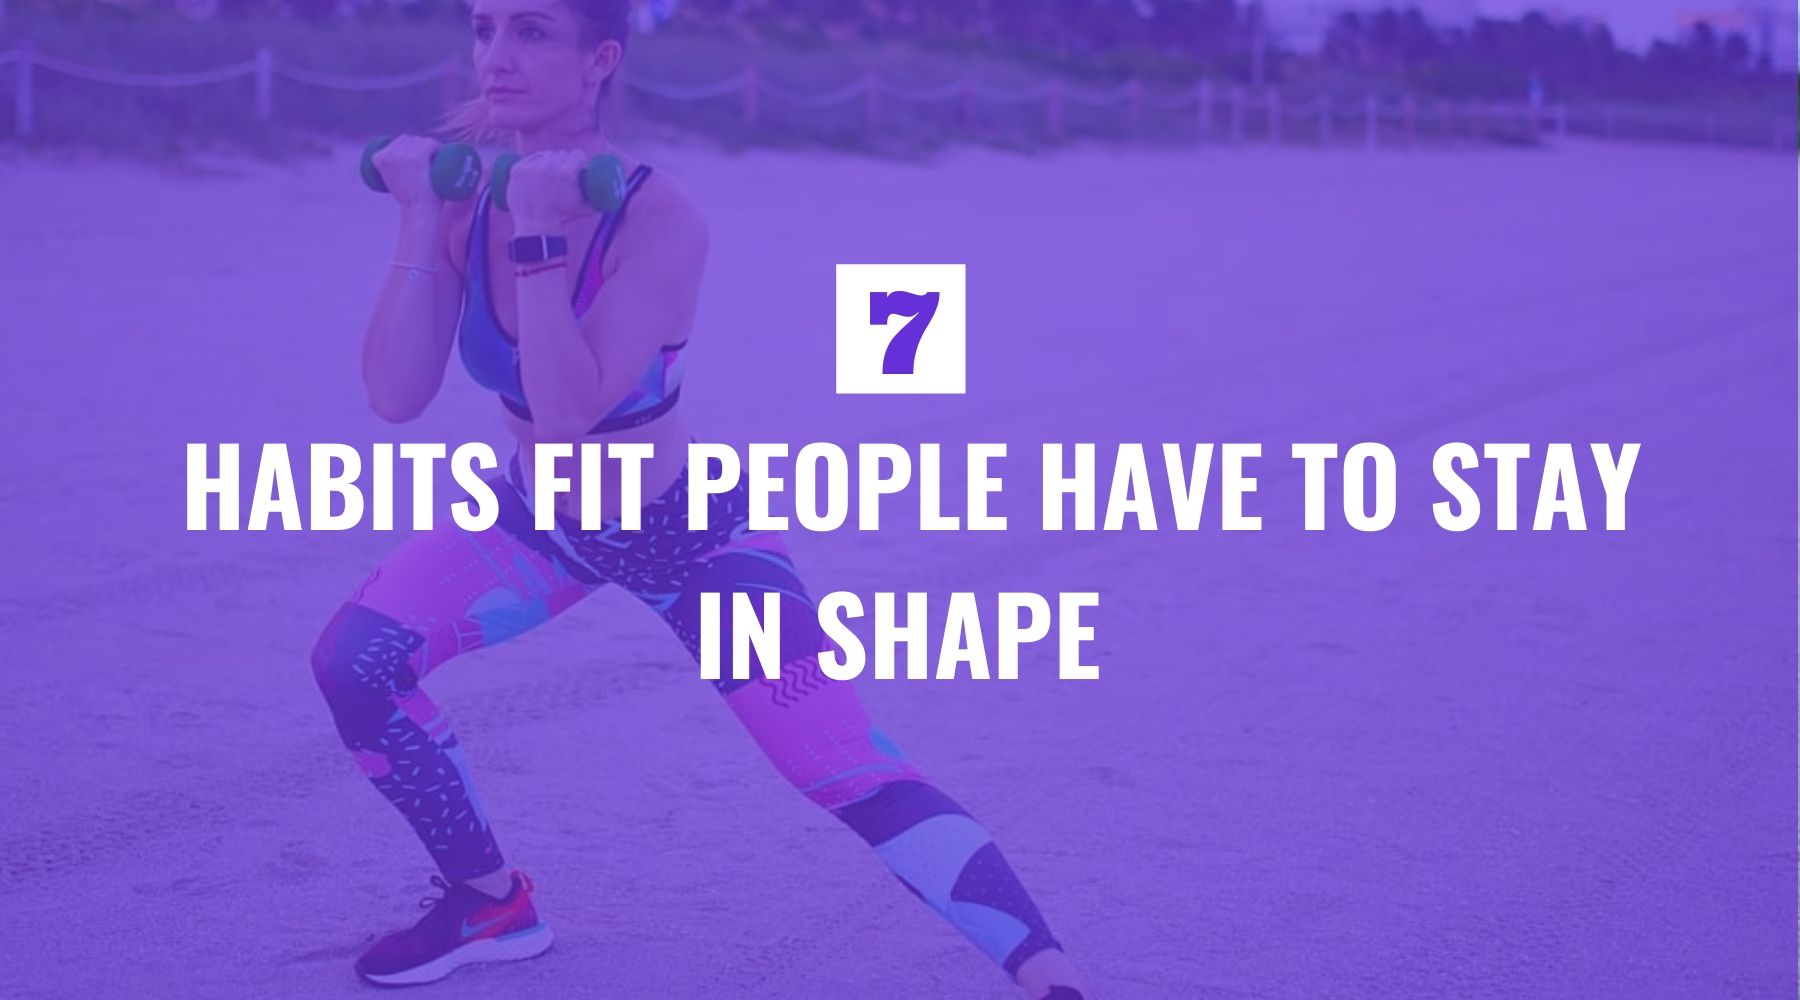 7 Habits Fit People Have to Stay in Shape